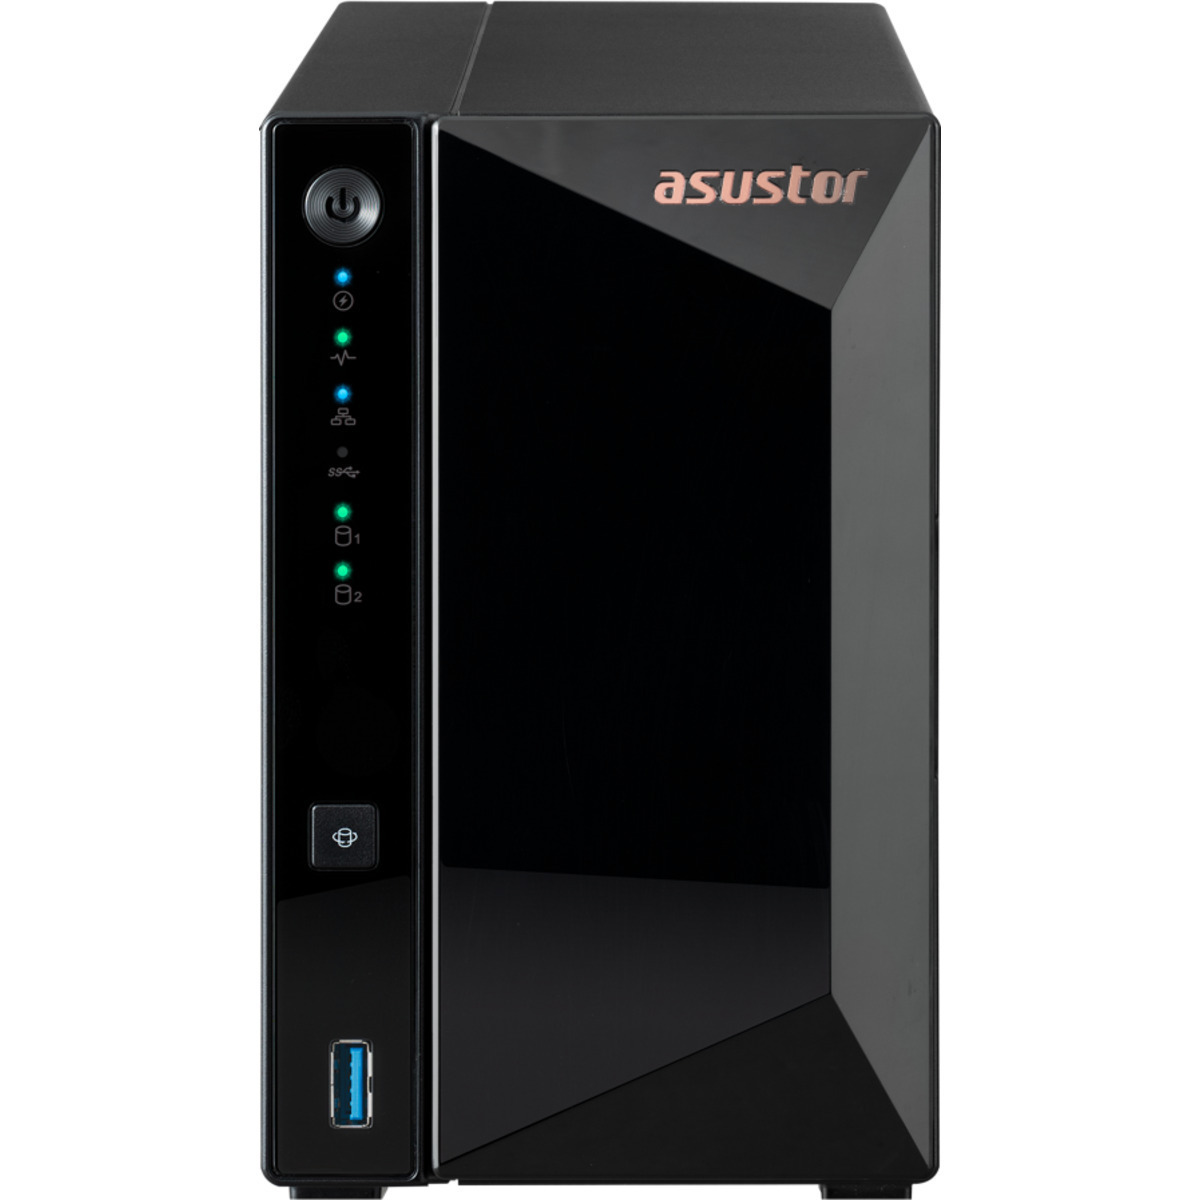 ASUSTOR DRIVESTOR 2 Pro Gen2 AS3302T v2 2tb 2-Bay Desktop Personal / Basic Home / Small Office NAS - Network Attached Storage Device 1x2tb Sandisk Ultra 3D SDSSDH3-2T00 2.5 560/520MB/s SATA 6Gb/s SSD CONSUMER Class Drives Installed - Burn-In Tested - ON SALE DRIVESTOR 2 Pro Gen2 AS3302T v2